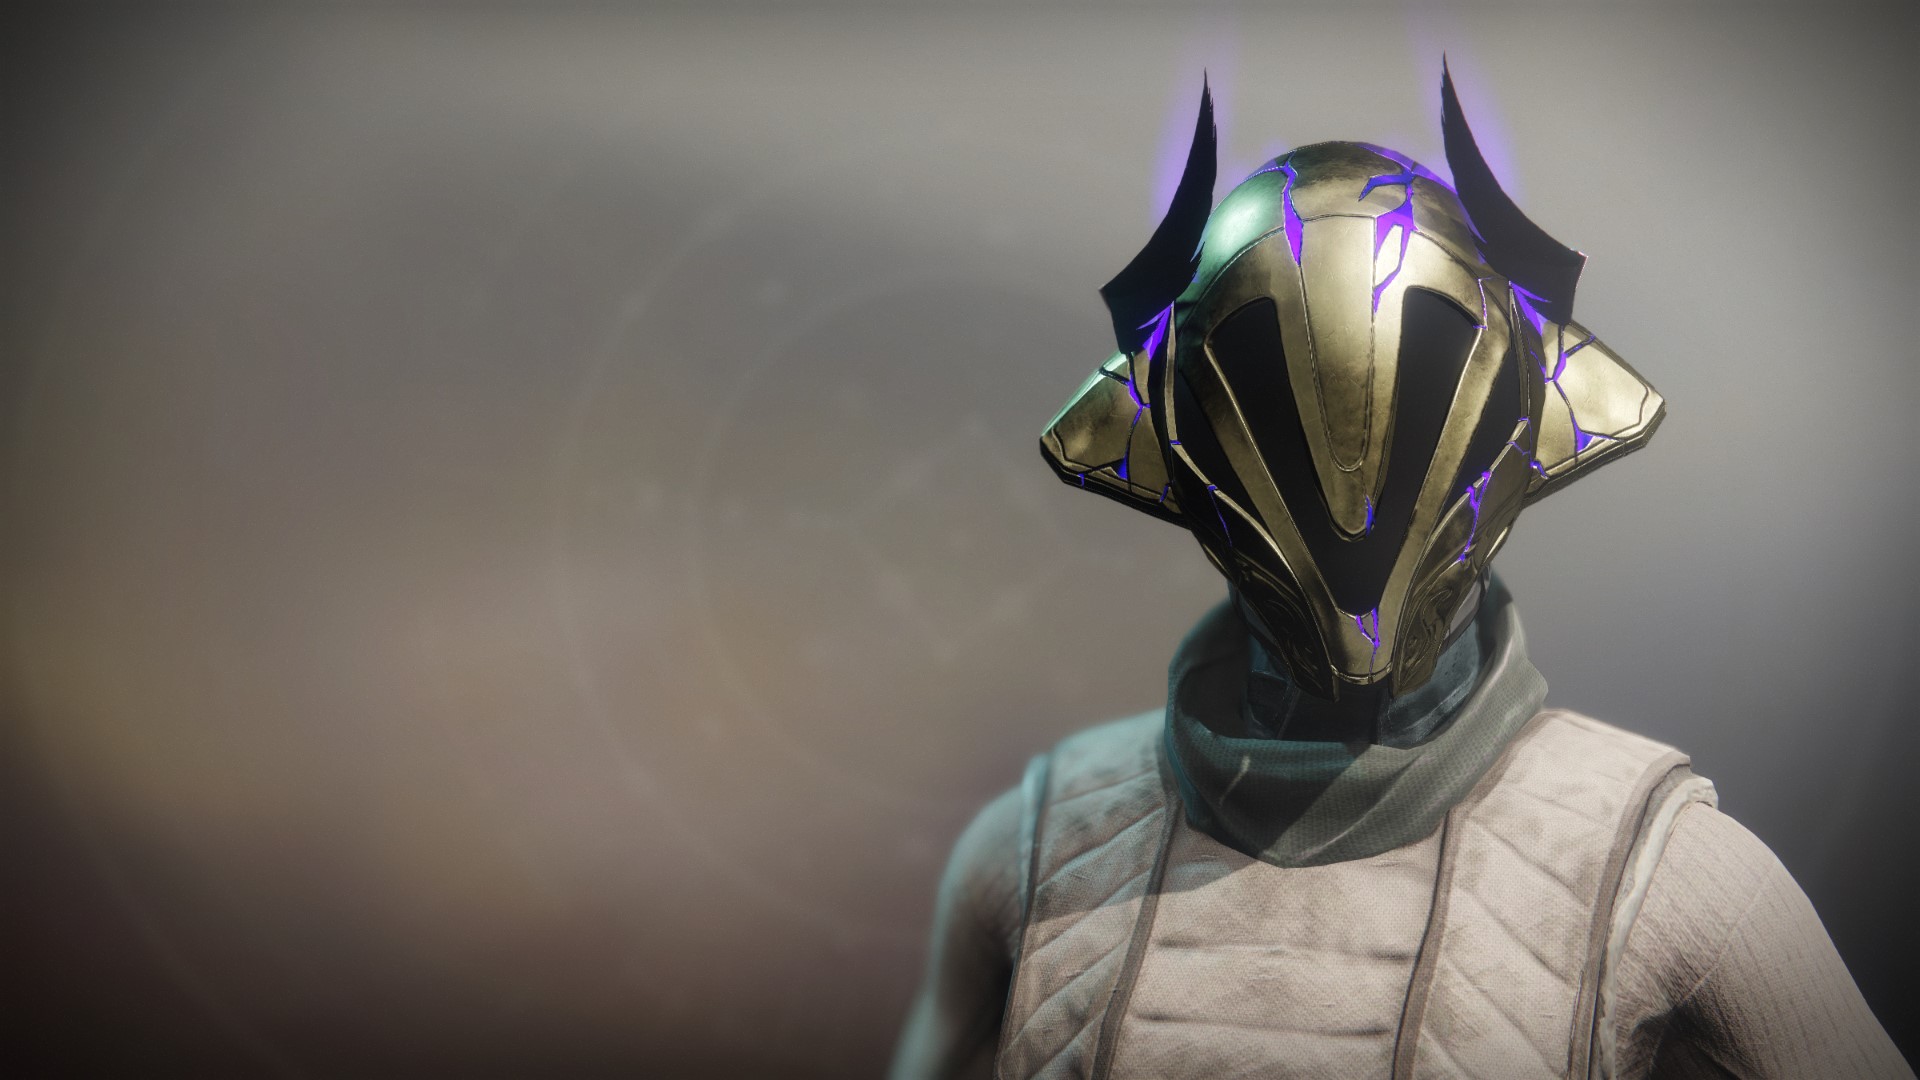 An in-game render of the Solstice Hood (Magnificent).